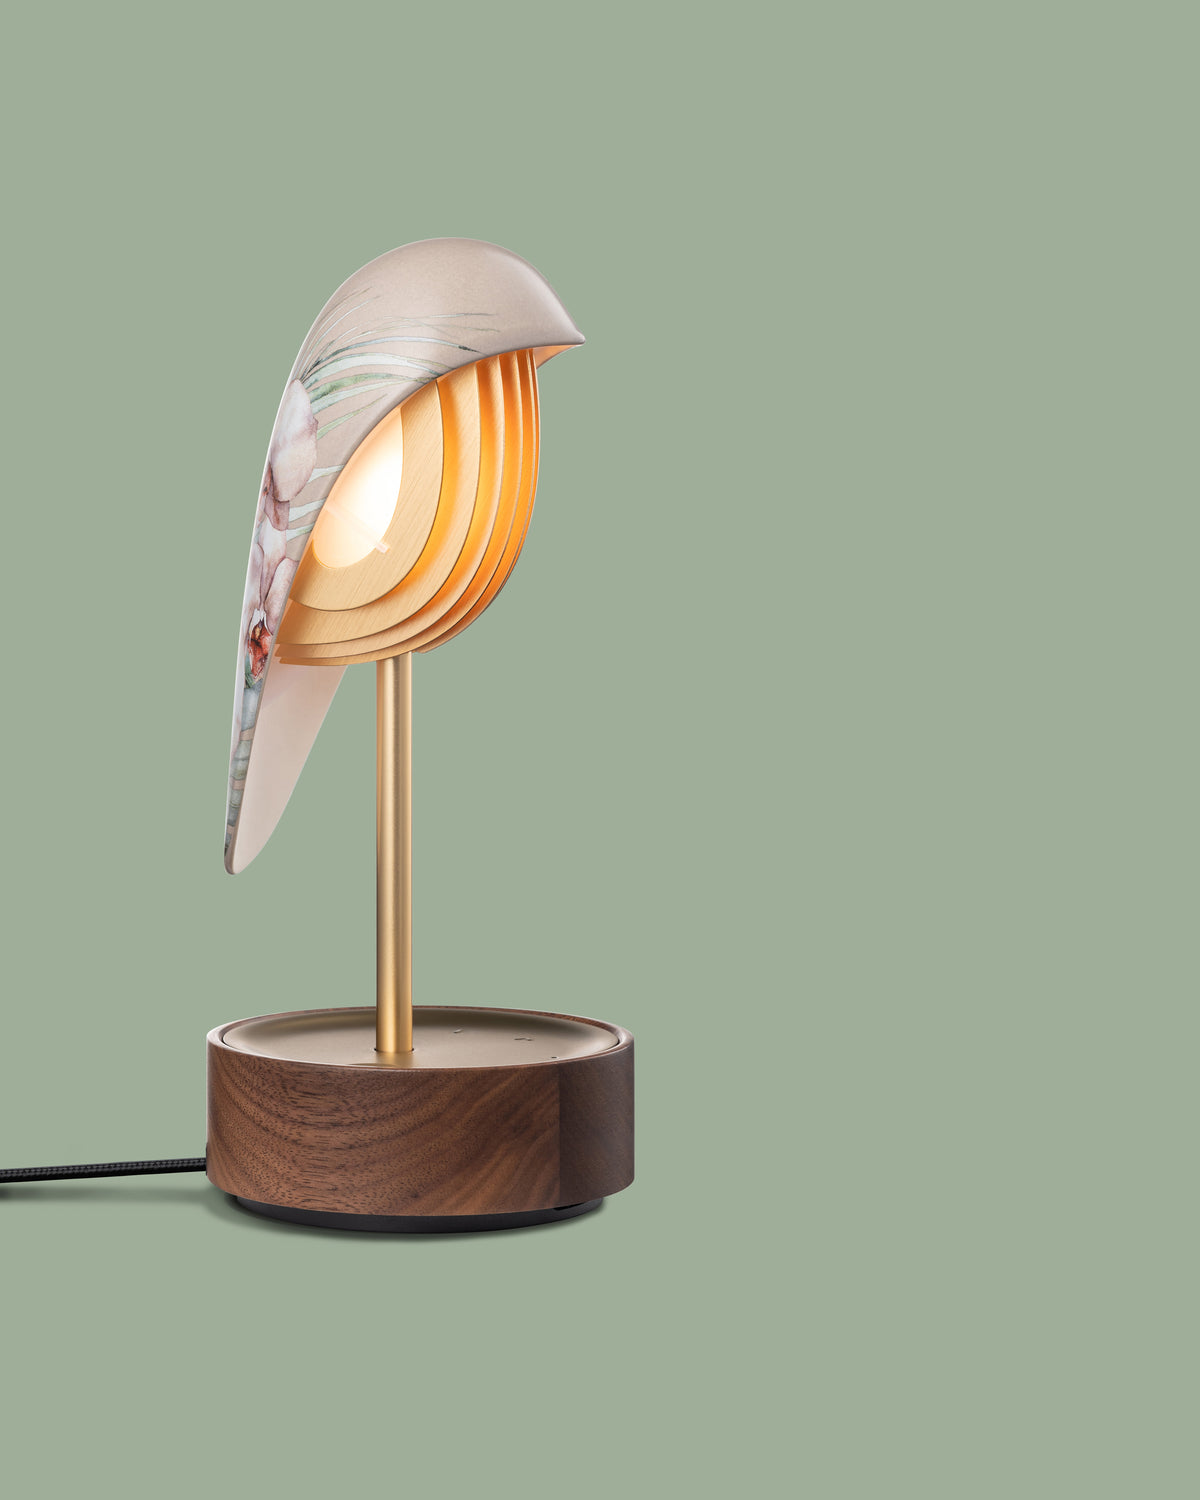 Daqi Alarm clock pale pink porcelain bird with gold accents and walnut base wakes up with bird sound works with an app